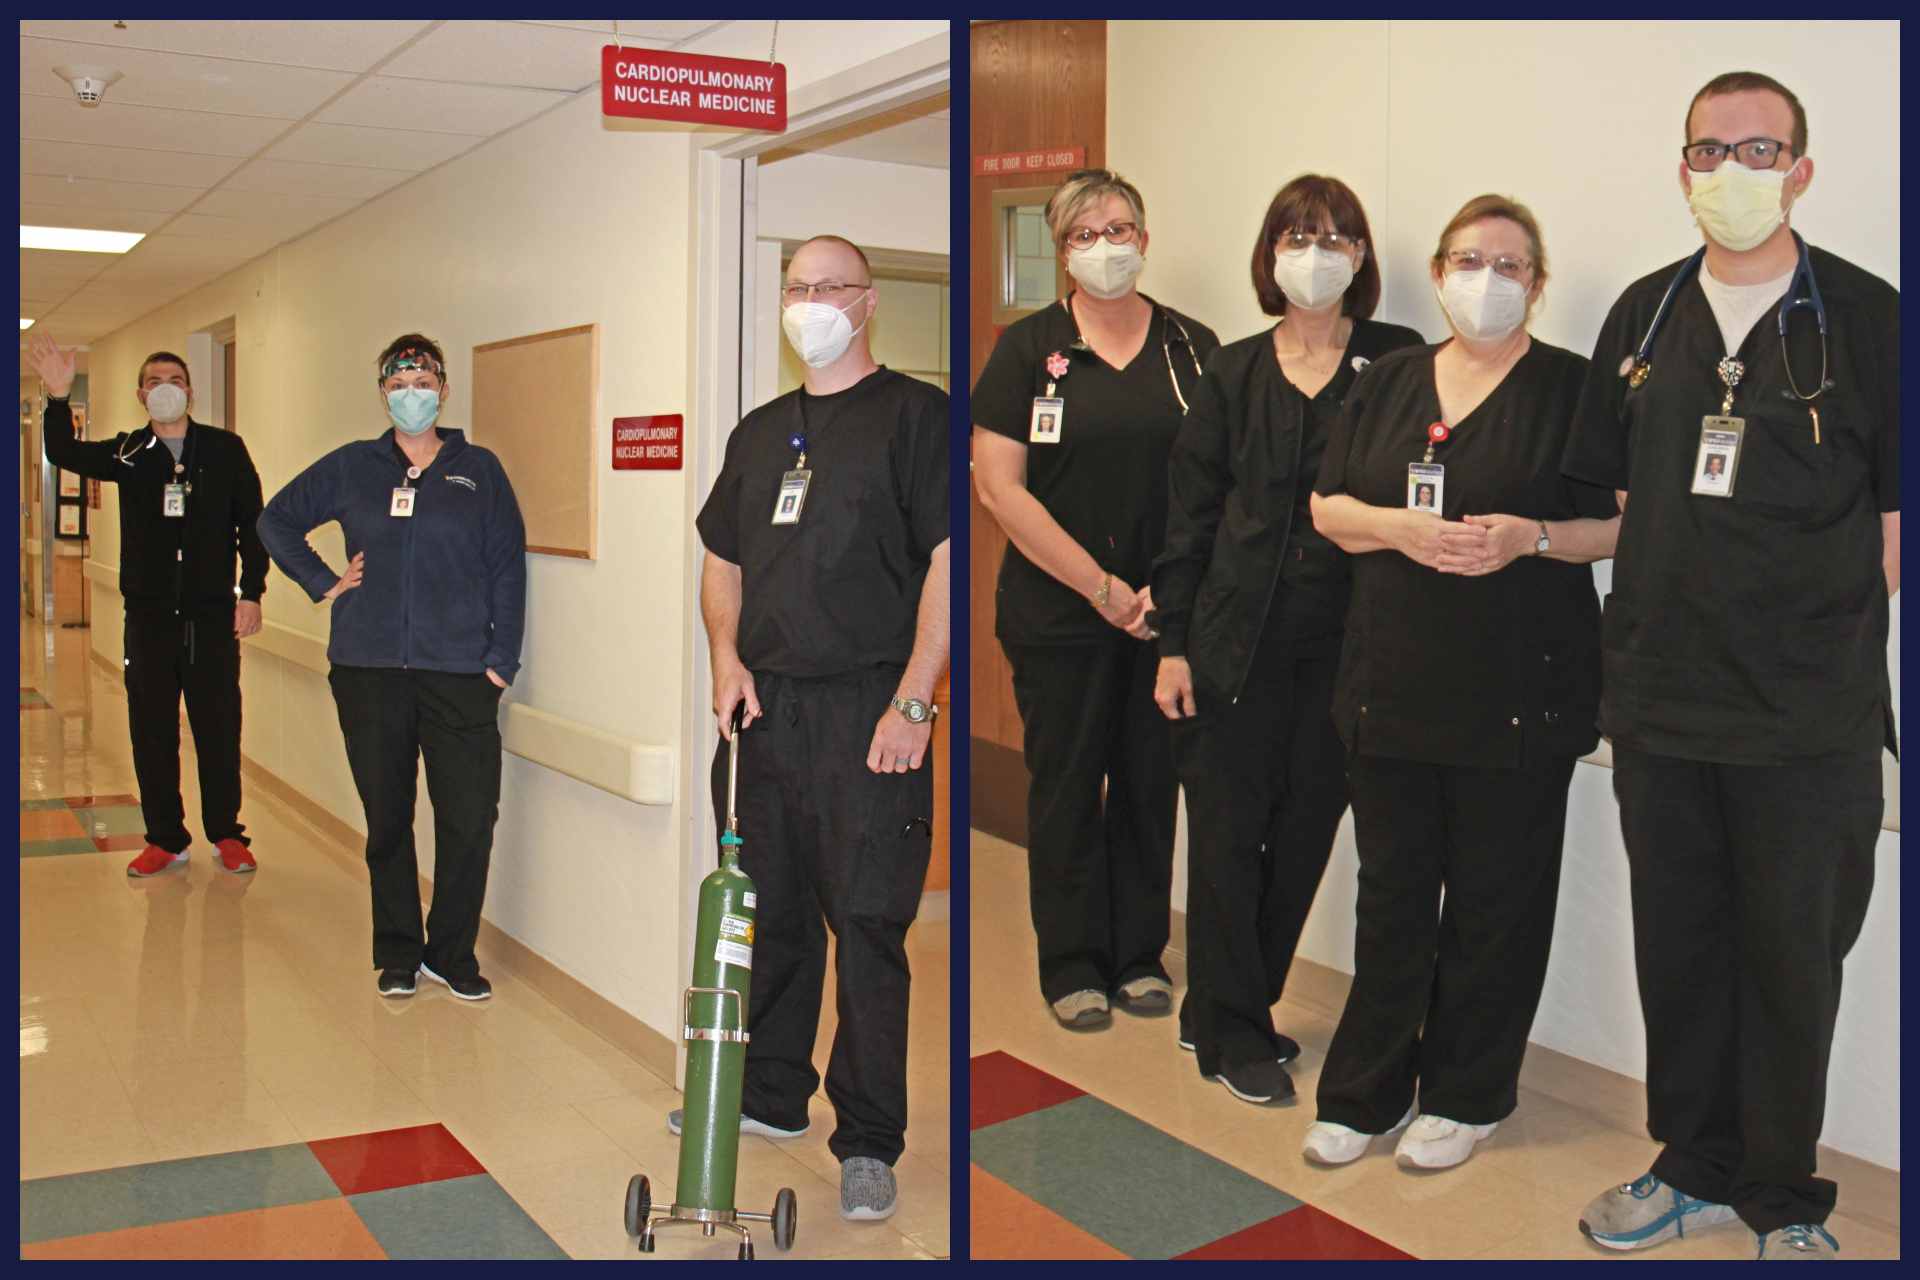 At left, from left to right: Registered Respiratory Therapists Jonathan Neal, Brandi Brown and Jim Kupfer. At right, from left to right: Registered Respiratory Therapists Stephanie Arden, Julie Neff, Kelly Ferren and John-Mark Ware.